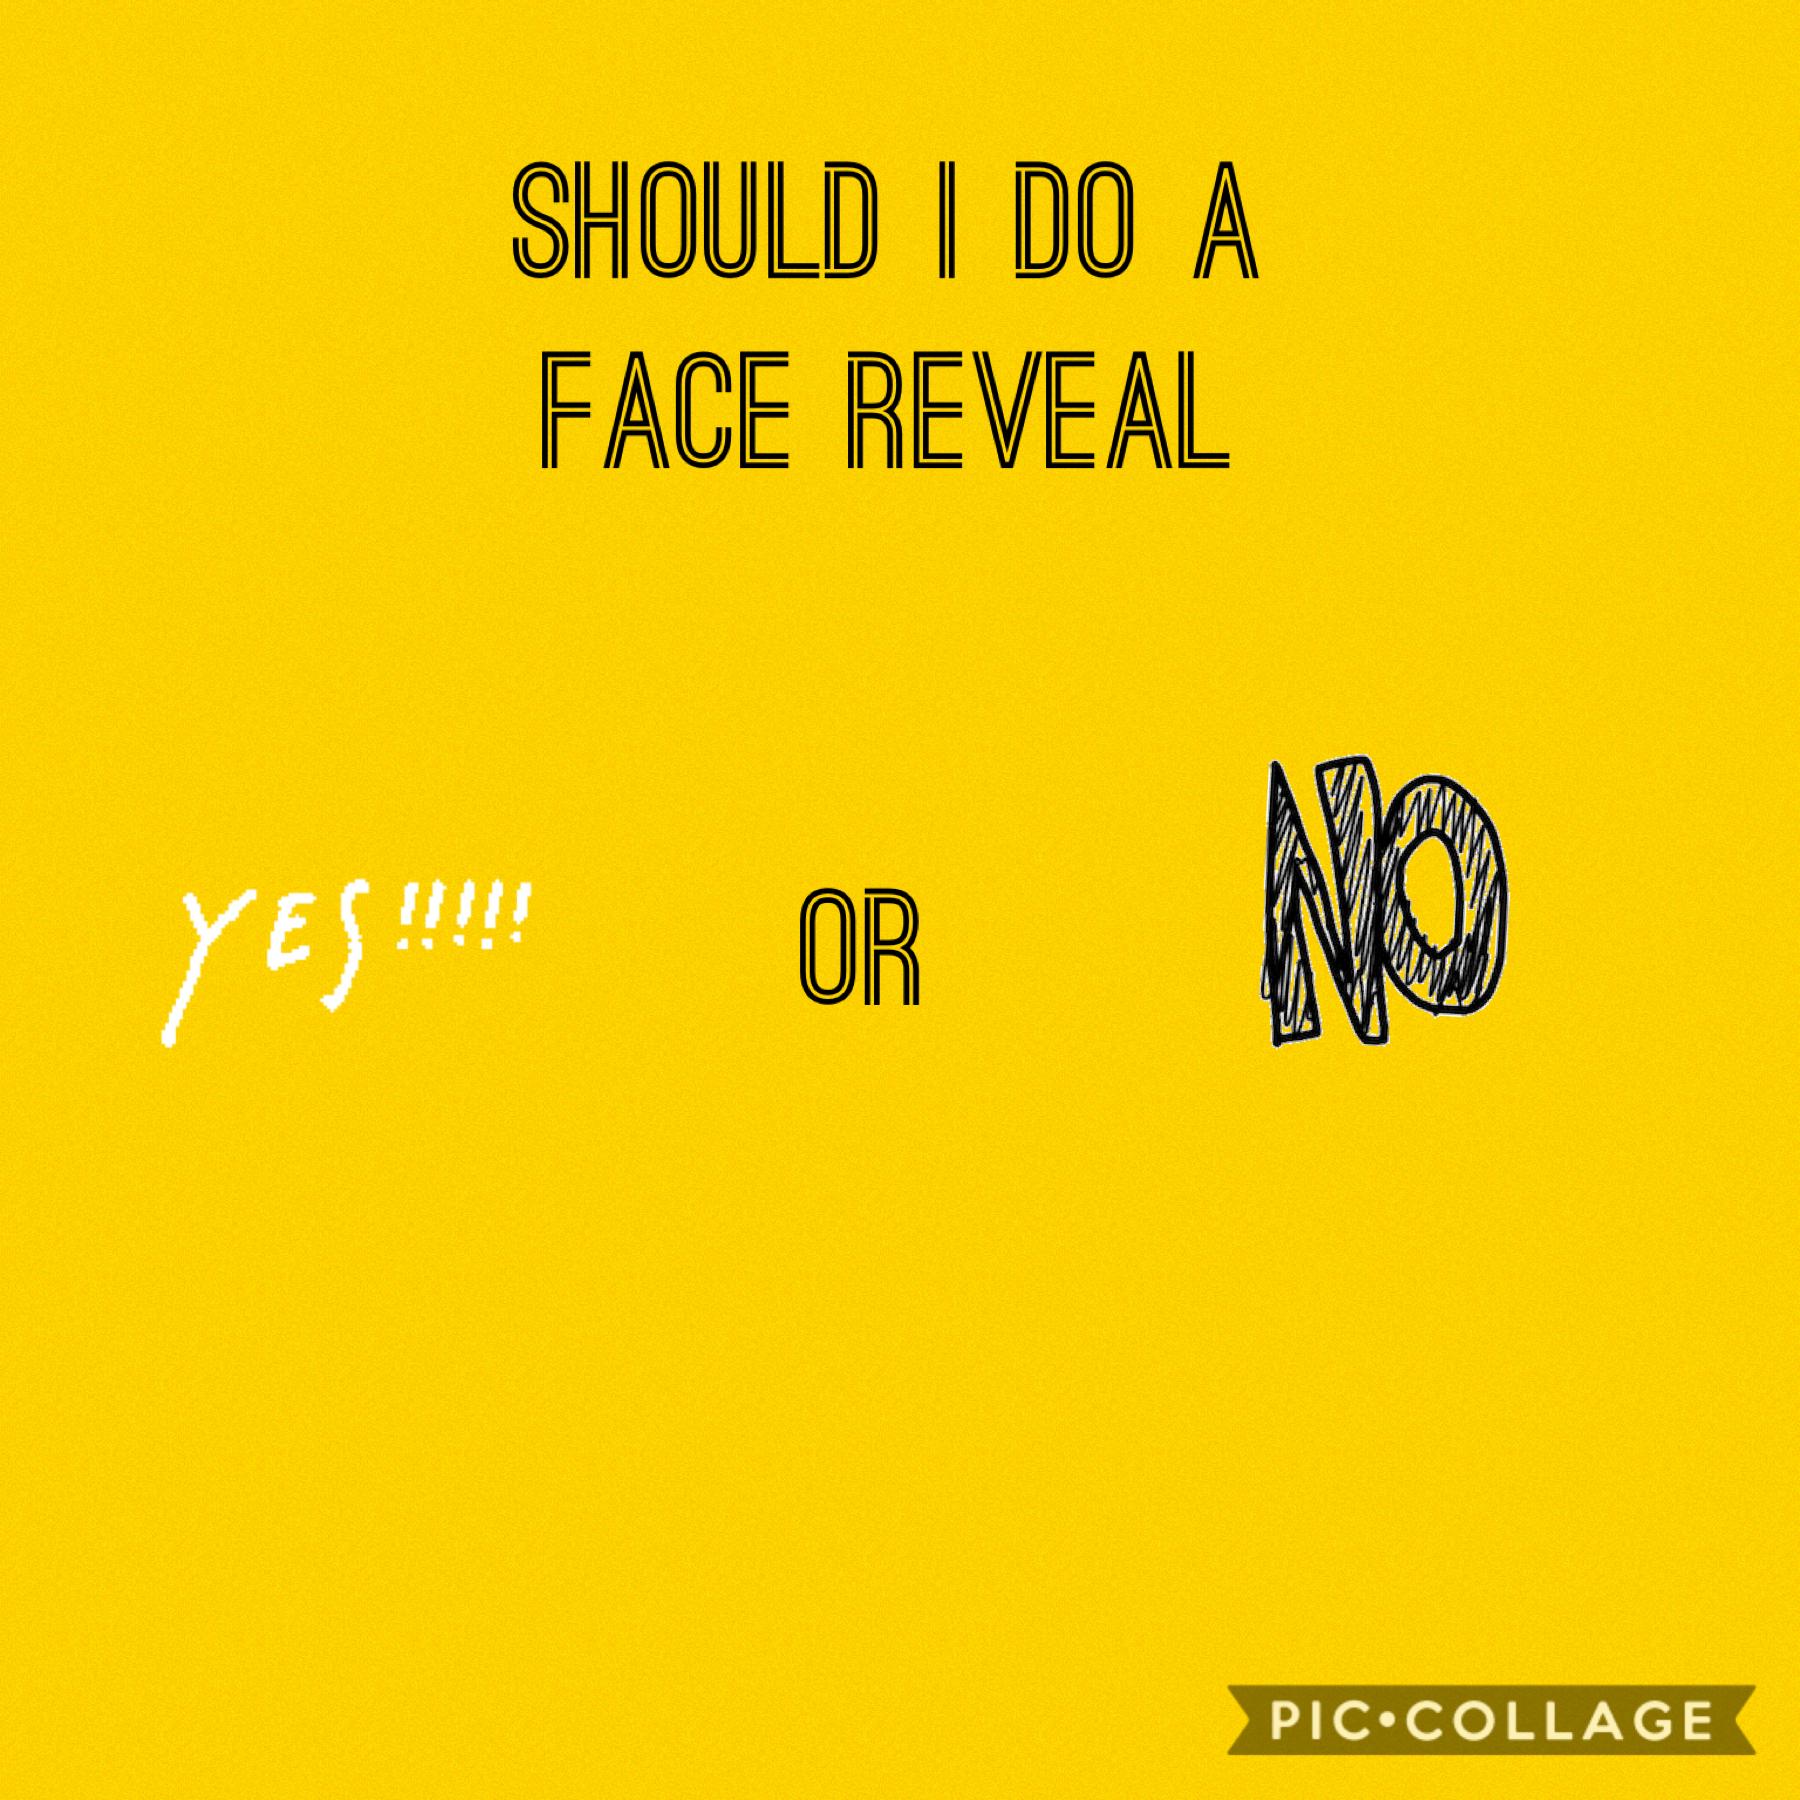 Face reveal or no